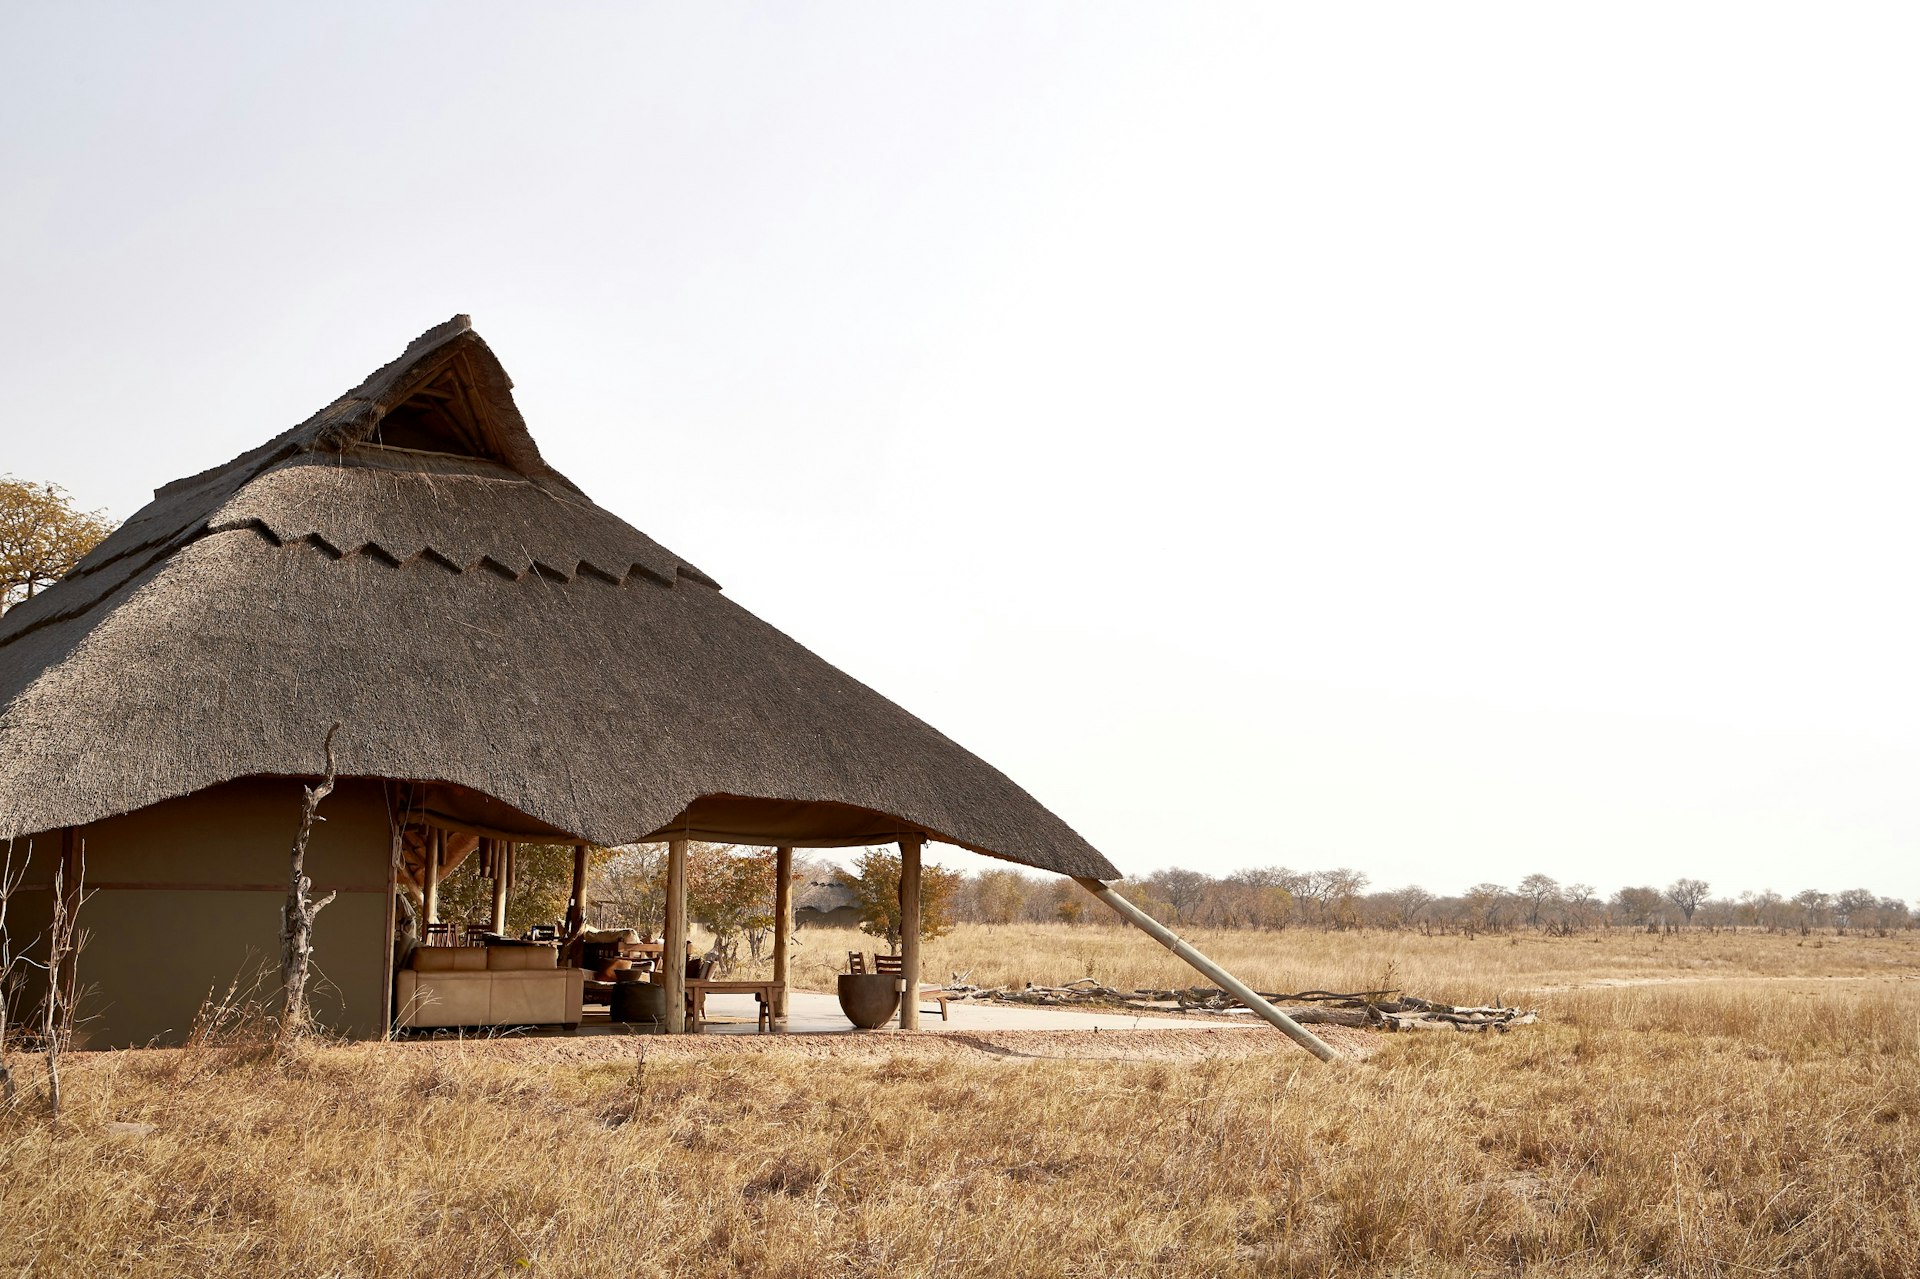 A beautiful thatch-roofed safari accommodation lodge sitting in a dry grass savannah; one half of the interior is open to the environment, with just the roof covering it (no walls).